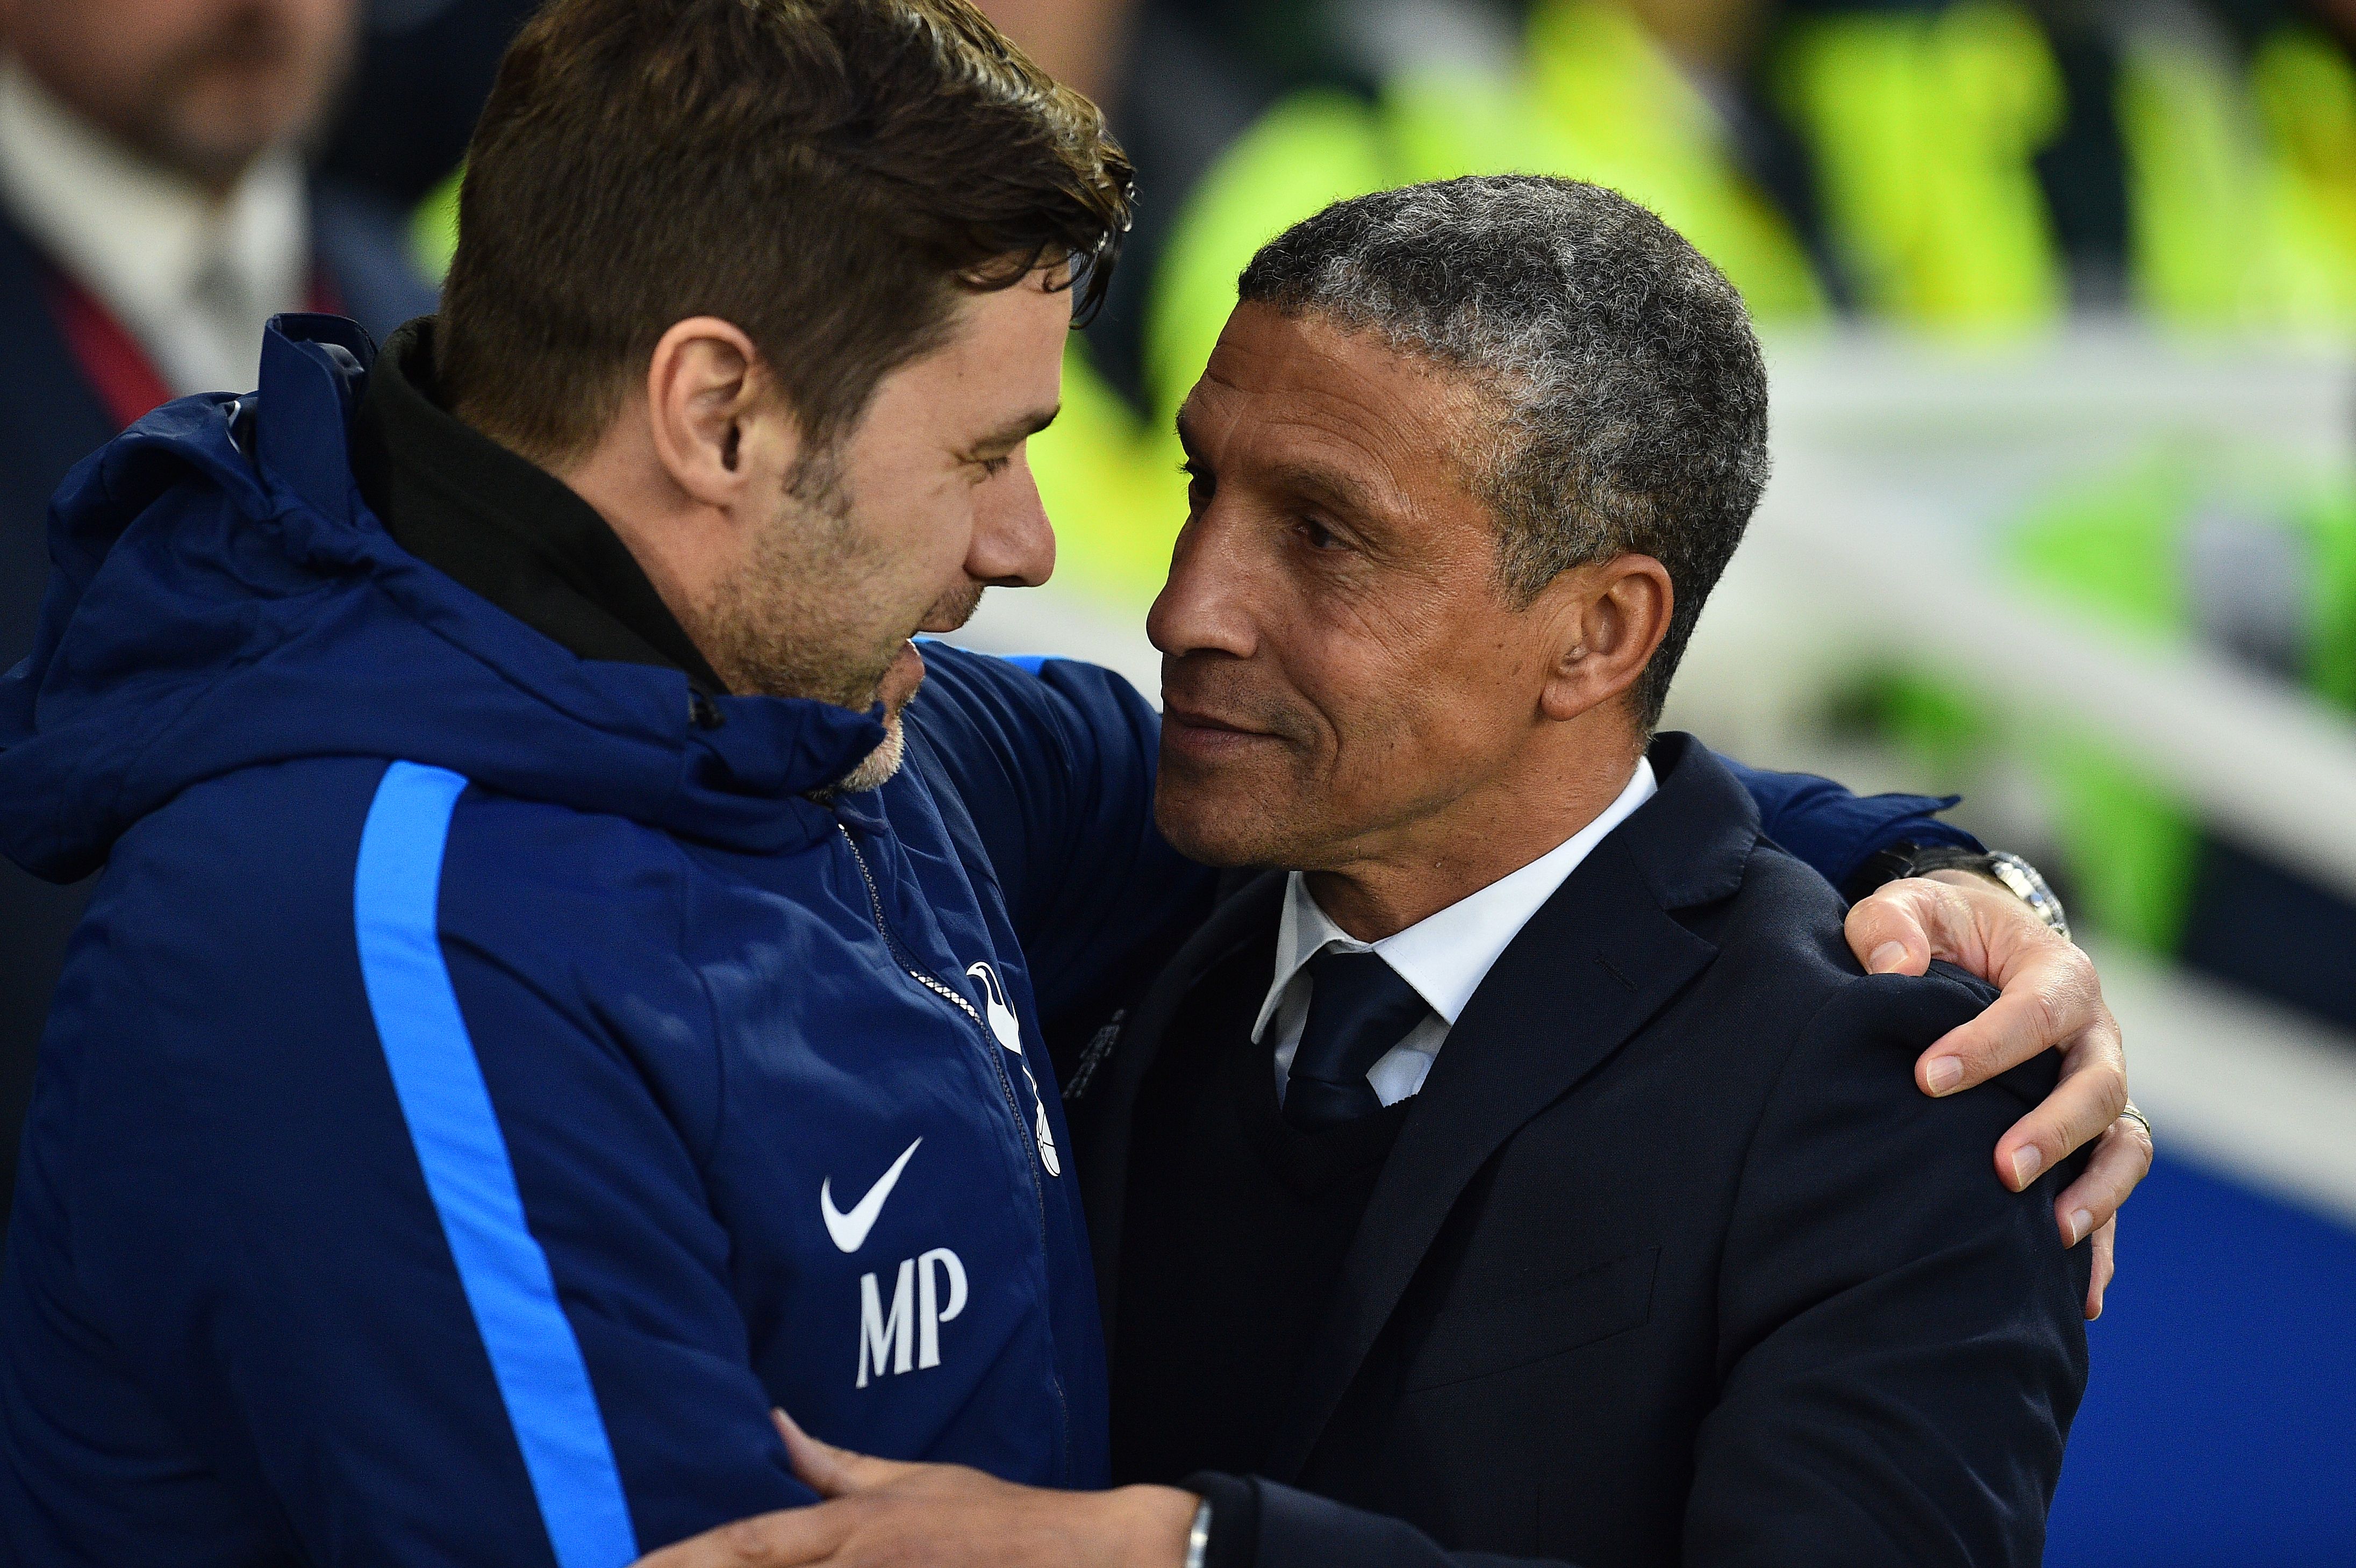 Tottenham Hotspur's Argentinian head coach Mauricio Pochettino (L) greets Brighton's Irish manager Chris Hughton ahead of the English Premier League football match between Brighton and Hove Albion and Tottenham Hotspur at the American Express Community Stadium in Brighton, southern England on April 17, 2018. / AFP PHOTO / Glyn KIRK / RESTRICTED TO EDITORIAL USE. No use with unauthorized audio, video, data, fixture lists, club/league logos or 'live' services. Online in-match use limited to 75 images, no video emulation. No use in betting, games or single club/league/player publications.  /         (Photo credit should read GLYN KIRK/AFP/Getty Images)